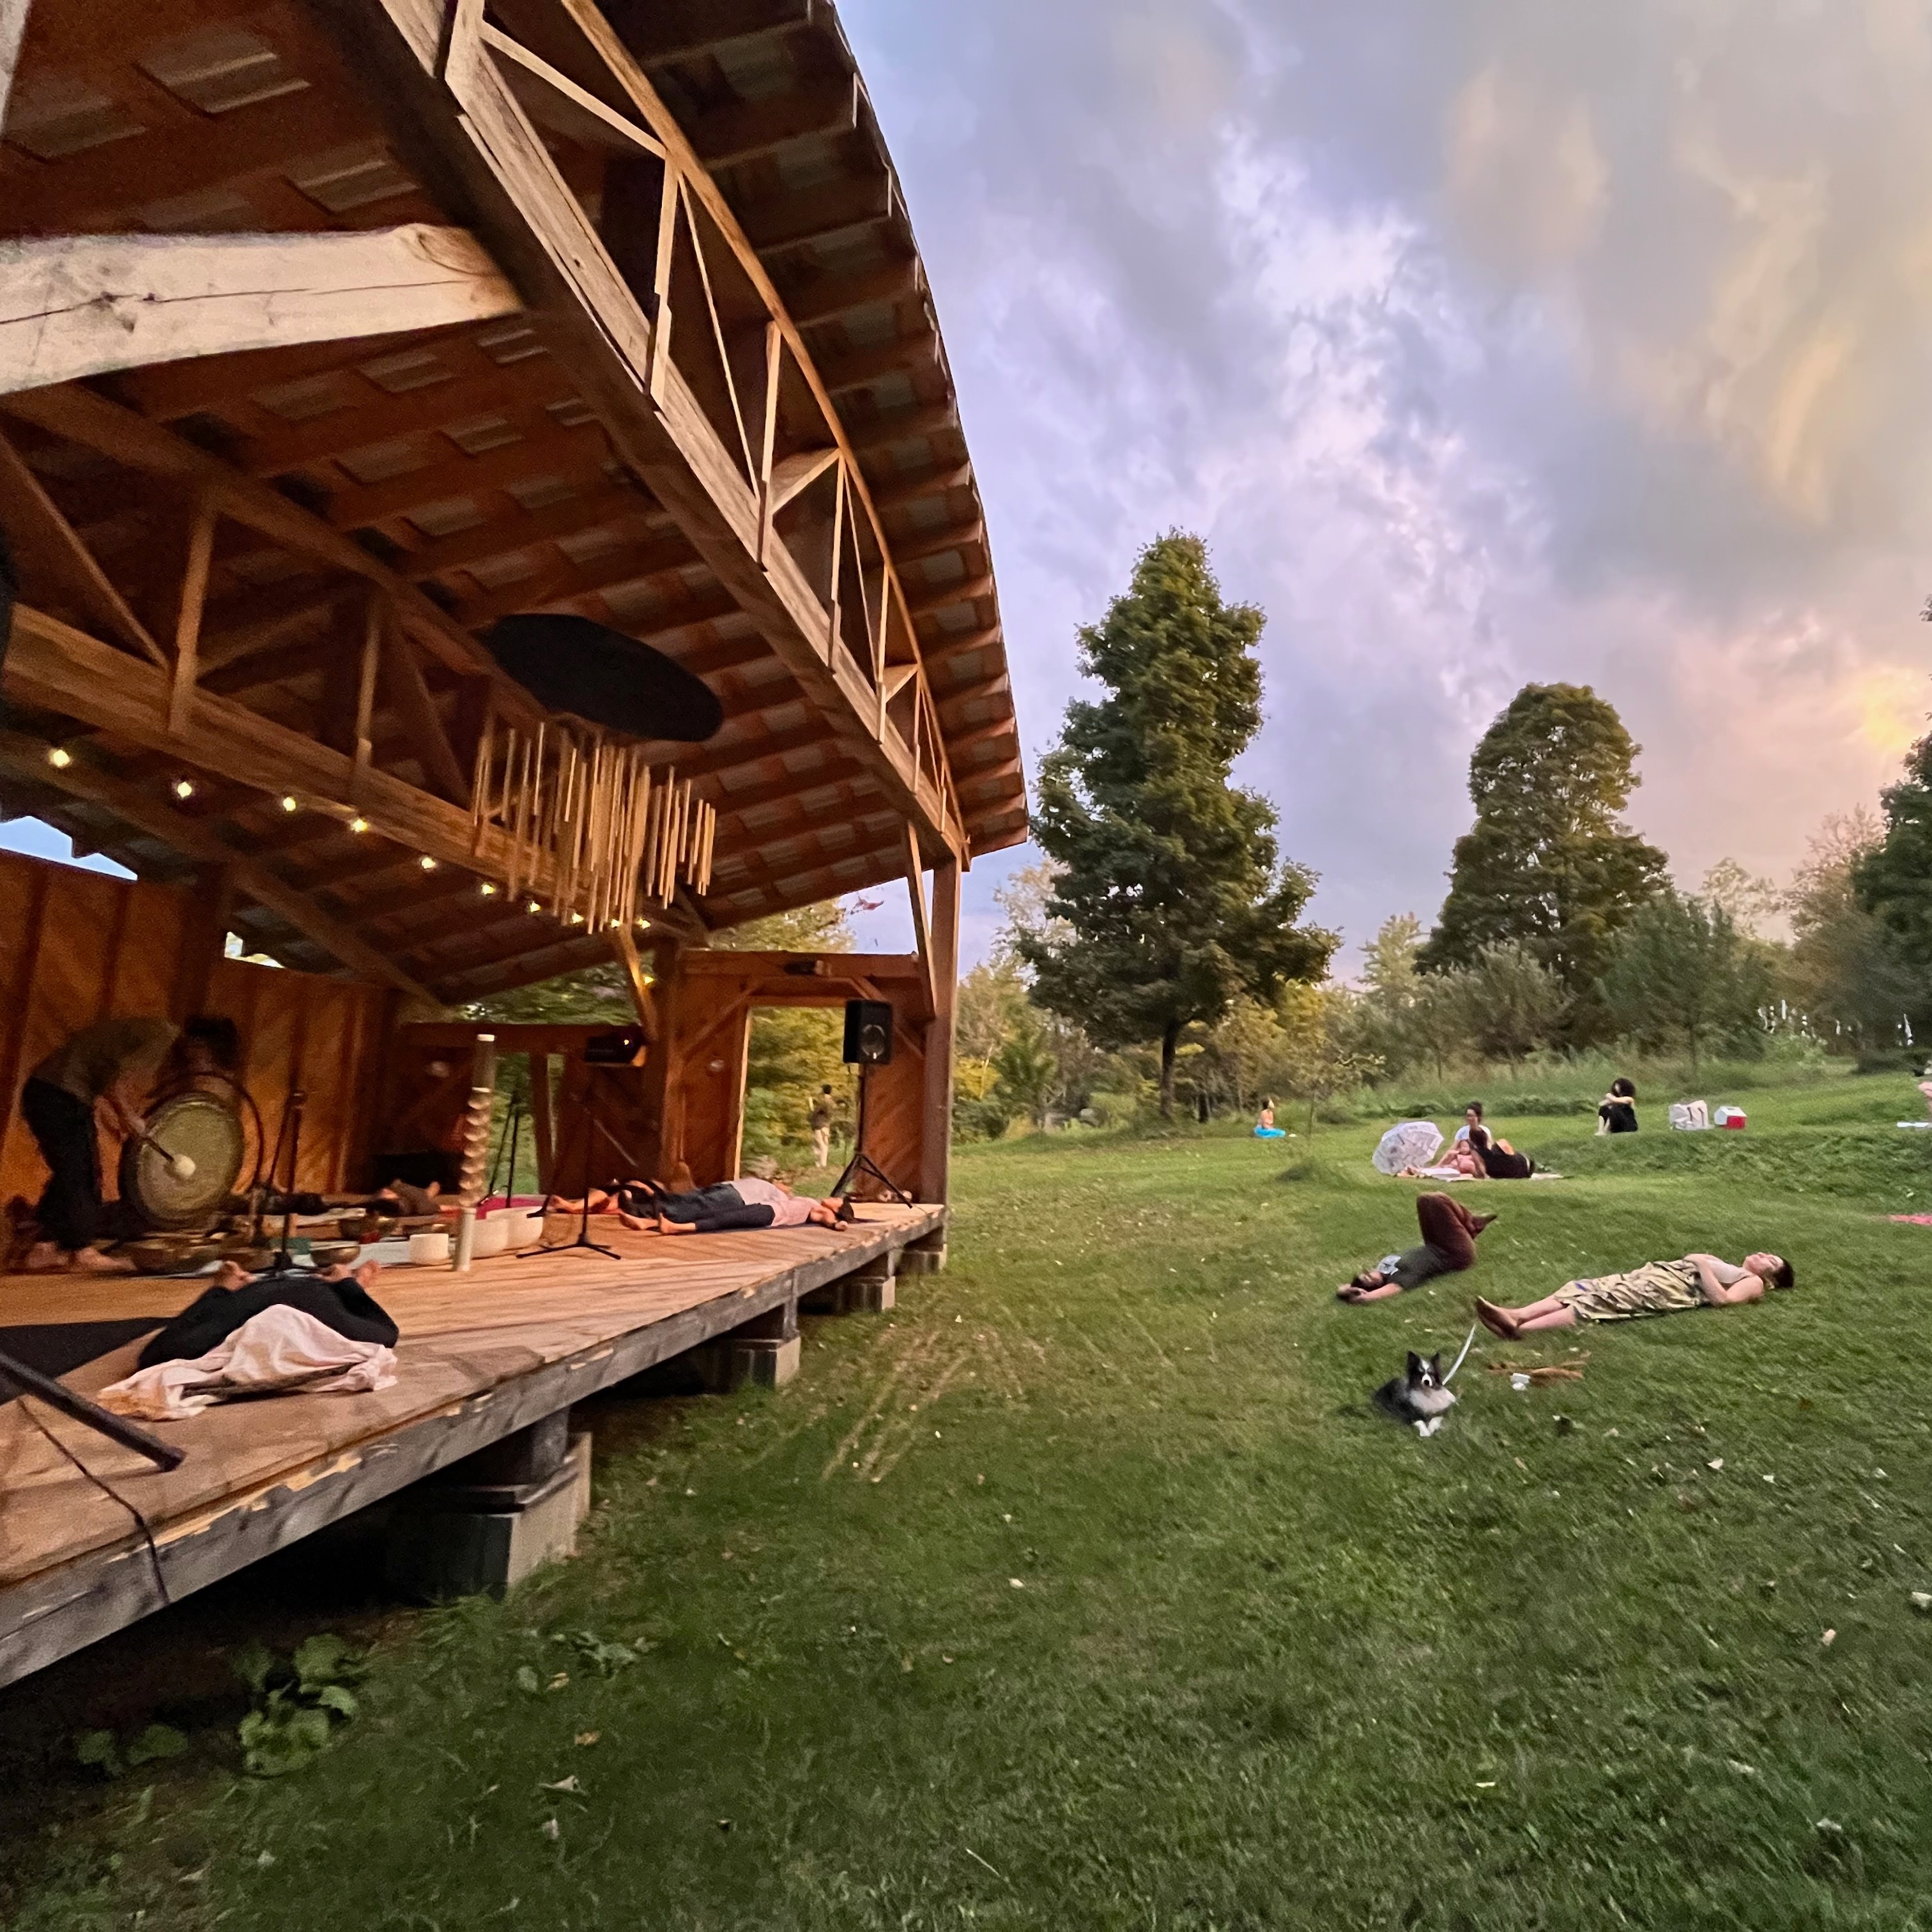 A magnificent wooden stage with a curved roof hosts a Sound Bath: Artist Tony Bednar rings a gong for participants lying on the stage in and in a grassy amphitheater. 